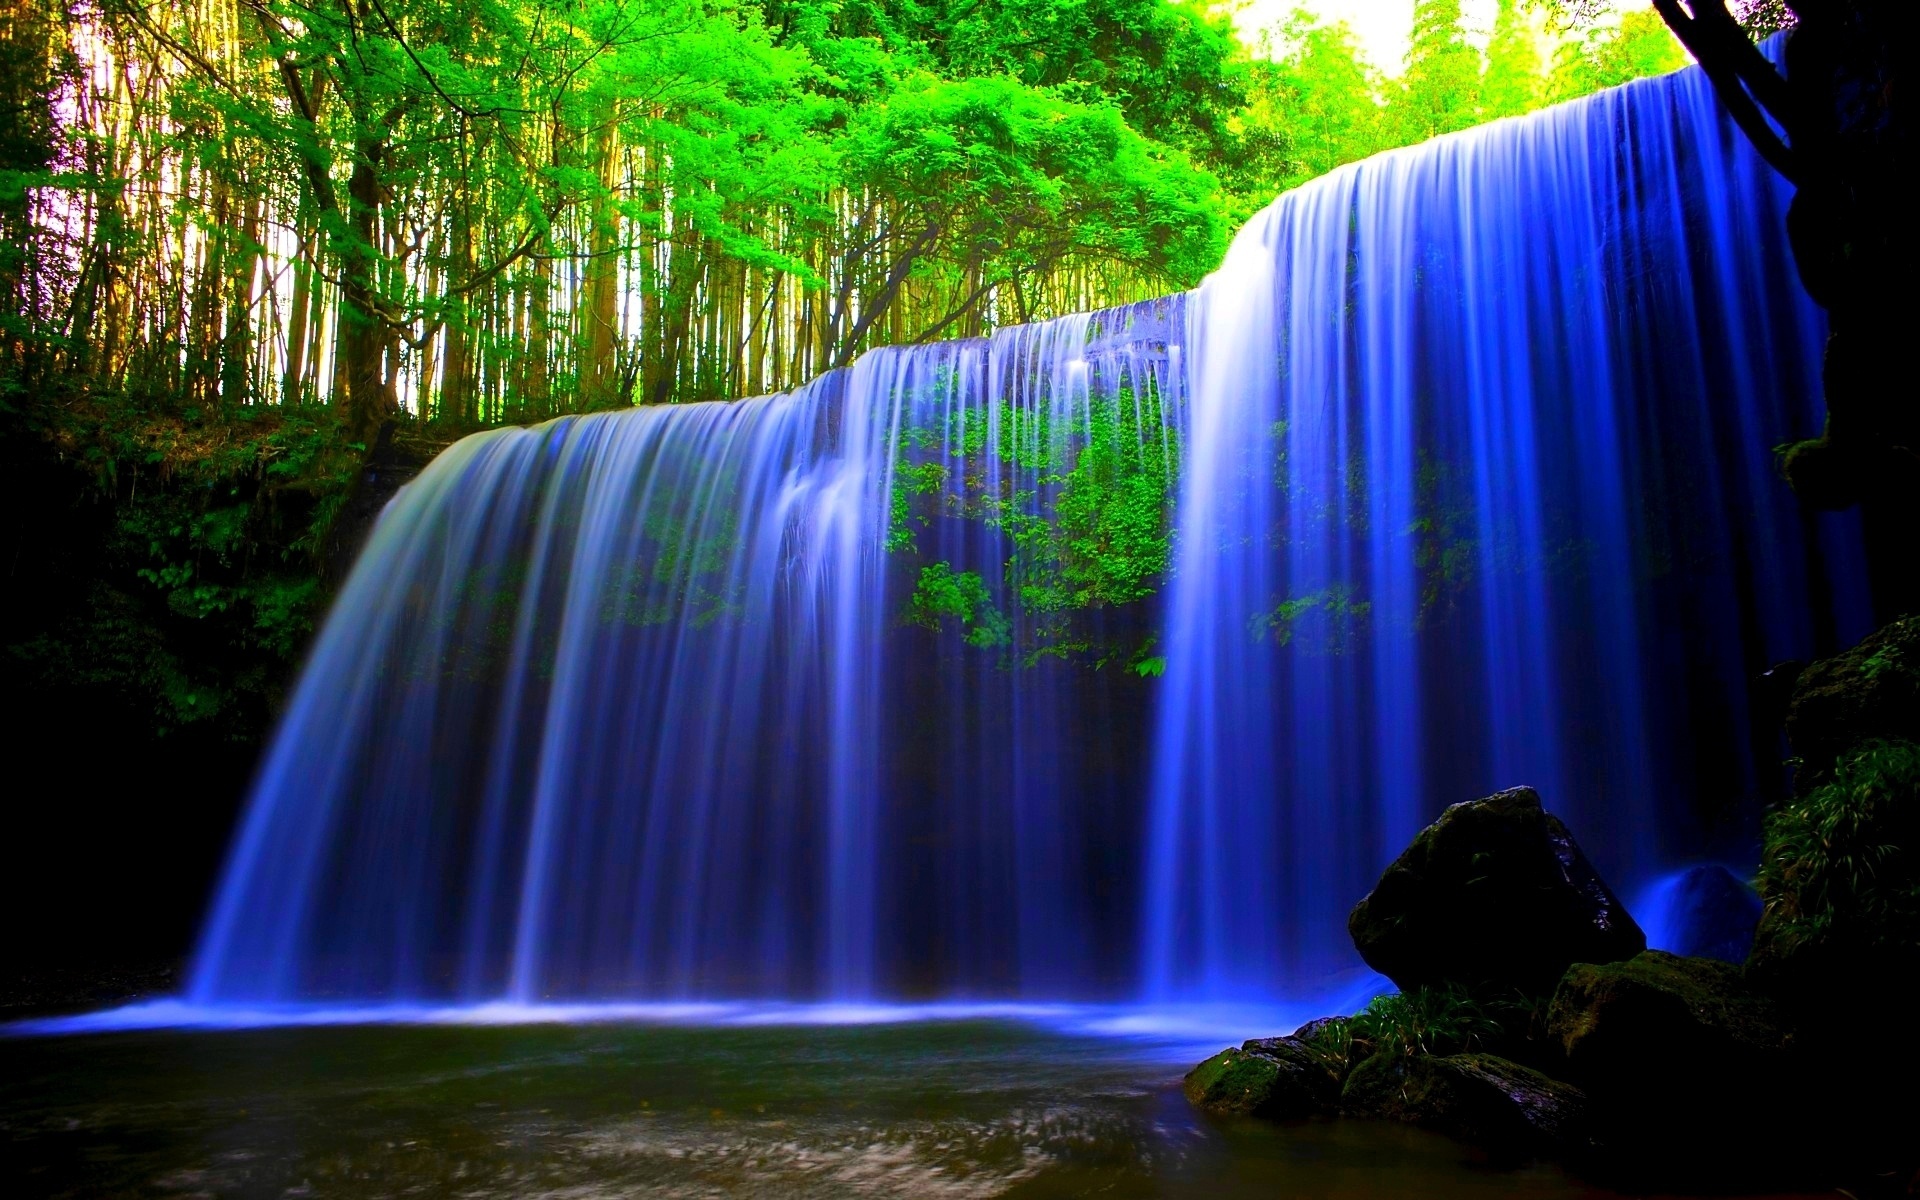 With Friends 3d Waterfall Live Wallpaper For Pc